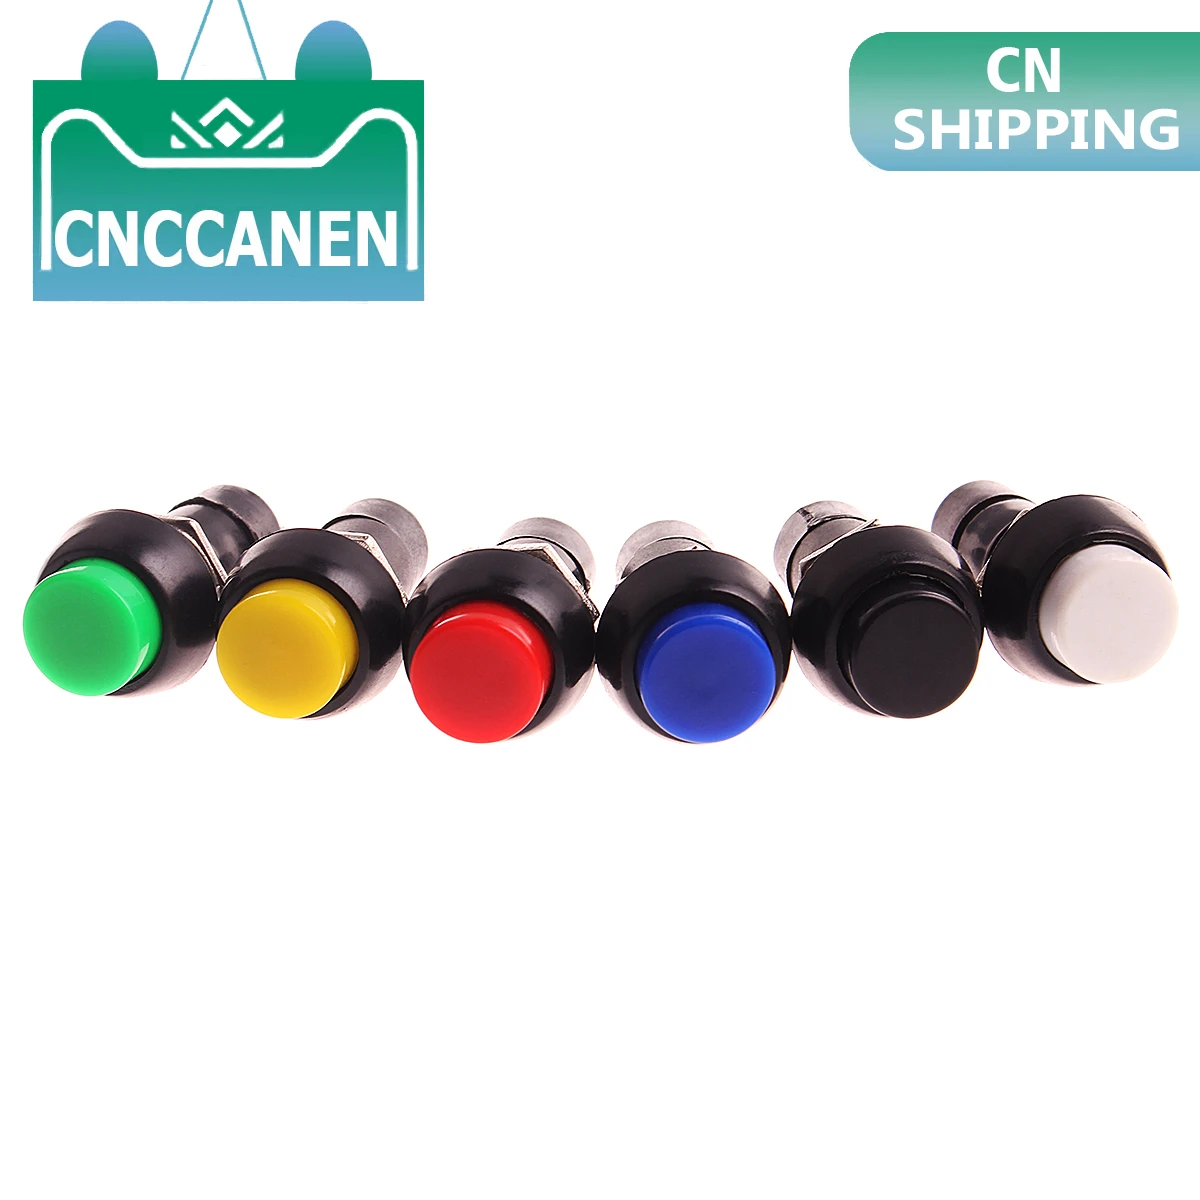 1PC PBS-11A PBS-11B 12mm self-locking Self-Recovery Plastic Push Button Switch momentary 3A 250V AC 2PIN 6Color gold light switch